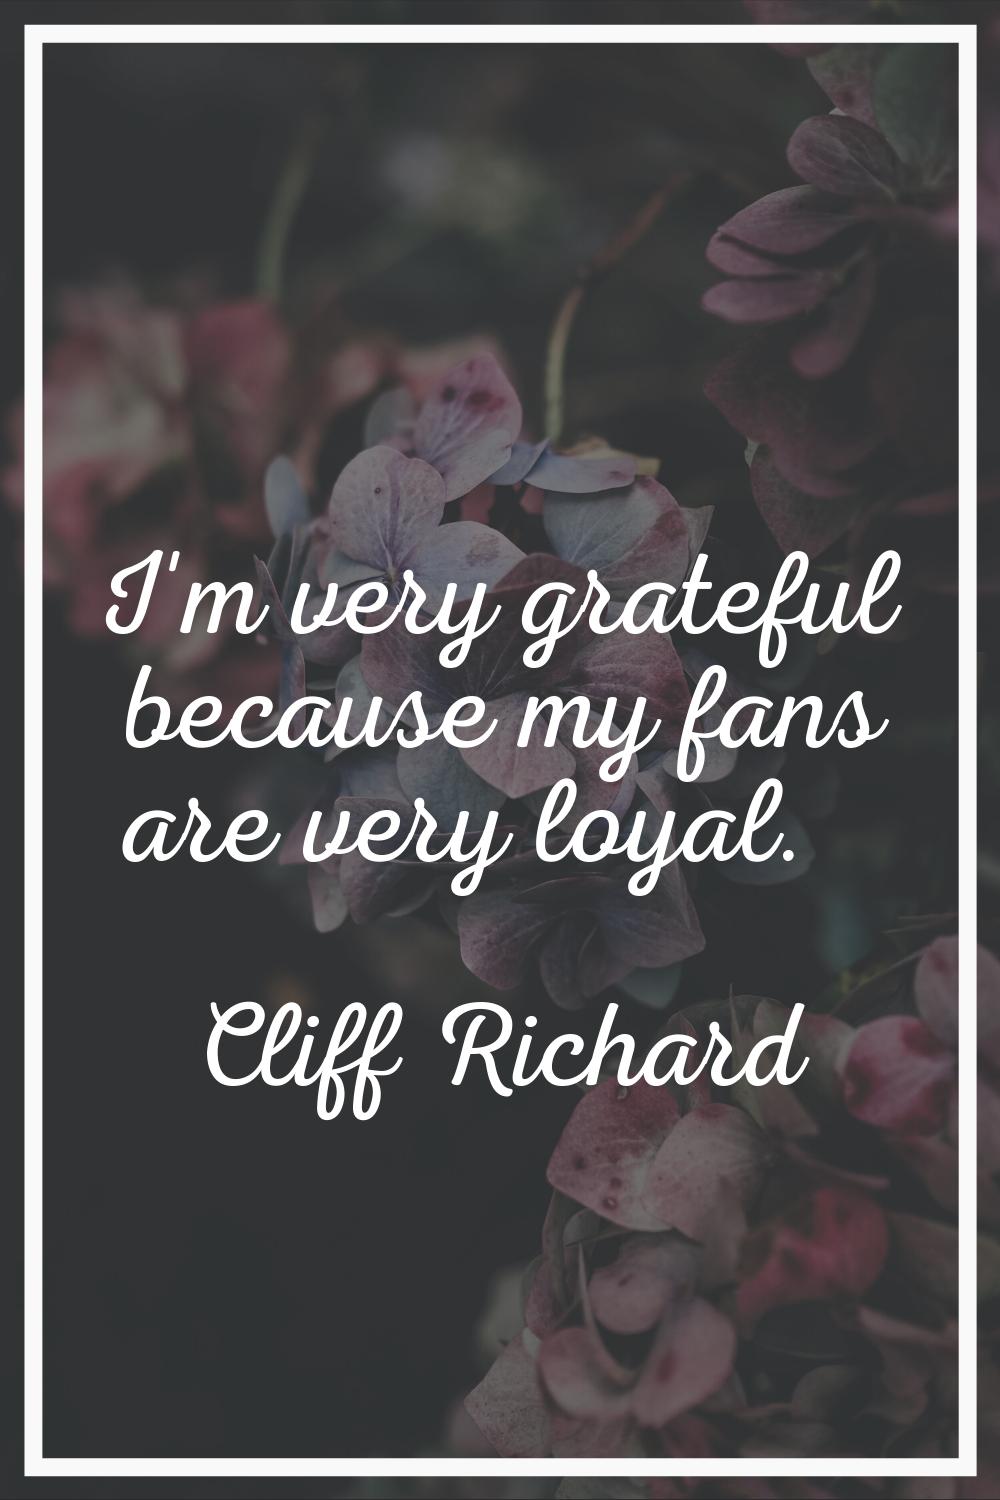 I'm very grateful because my fans are very loyal.